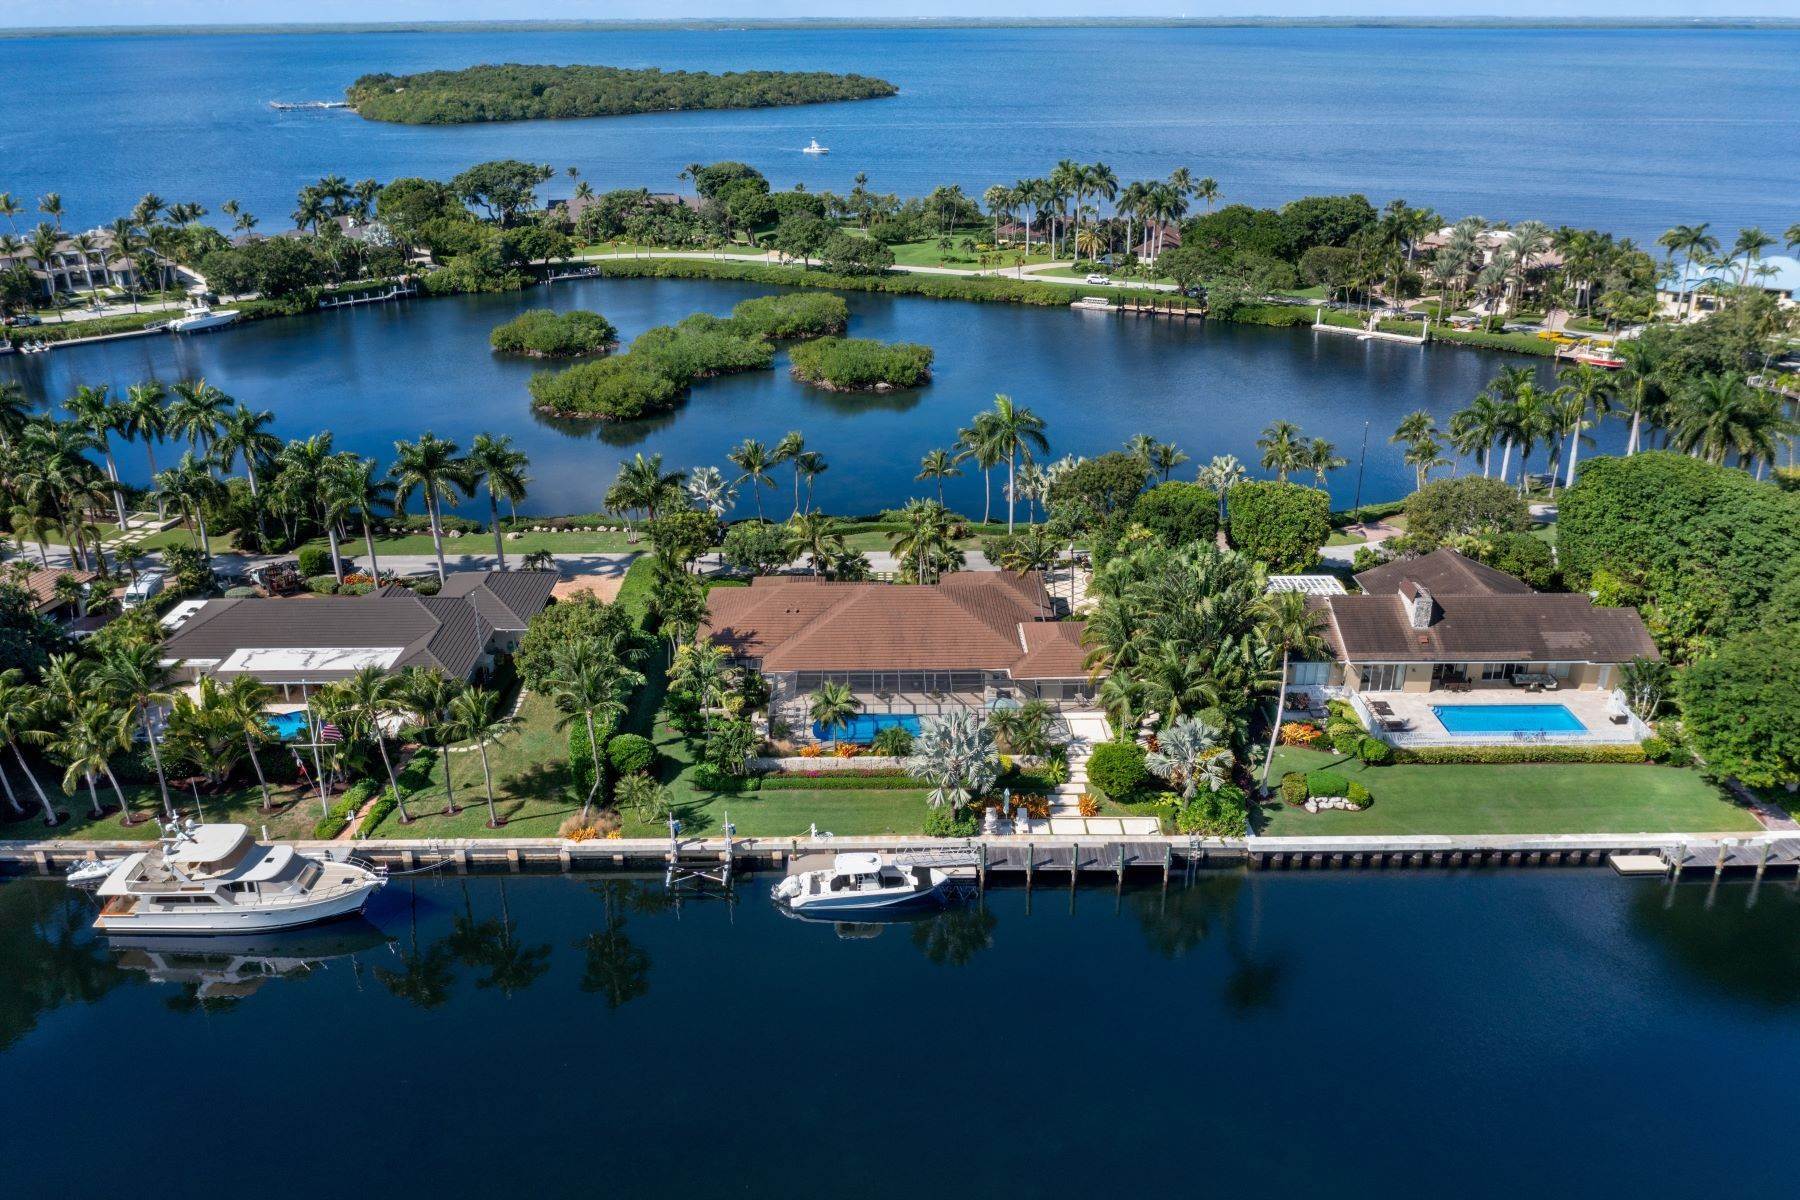 Single Family Homes for Sale at 33 East Snapper Point Drive, Key Largo, FL 33 East Snapper Point Drive Key Largo, Florida 33037 United States